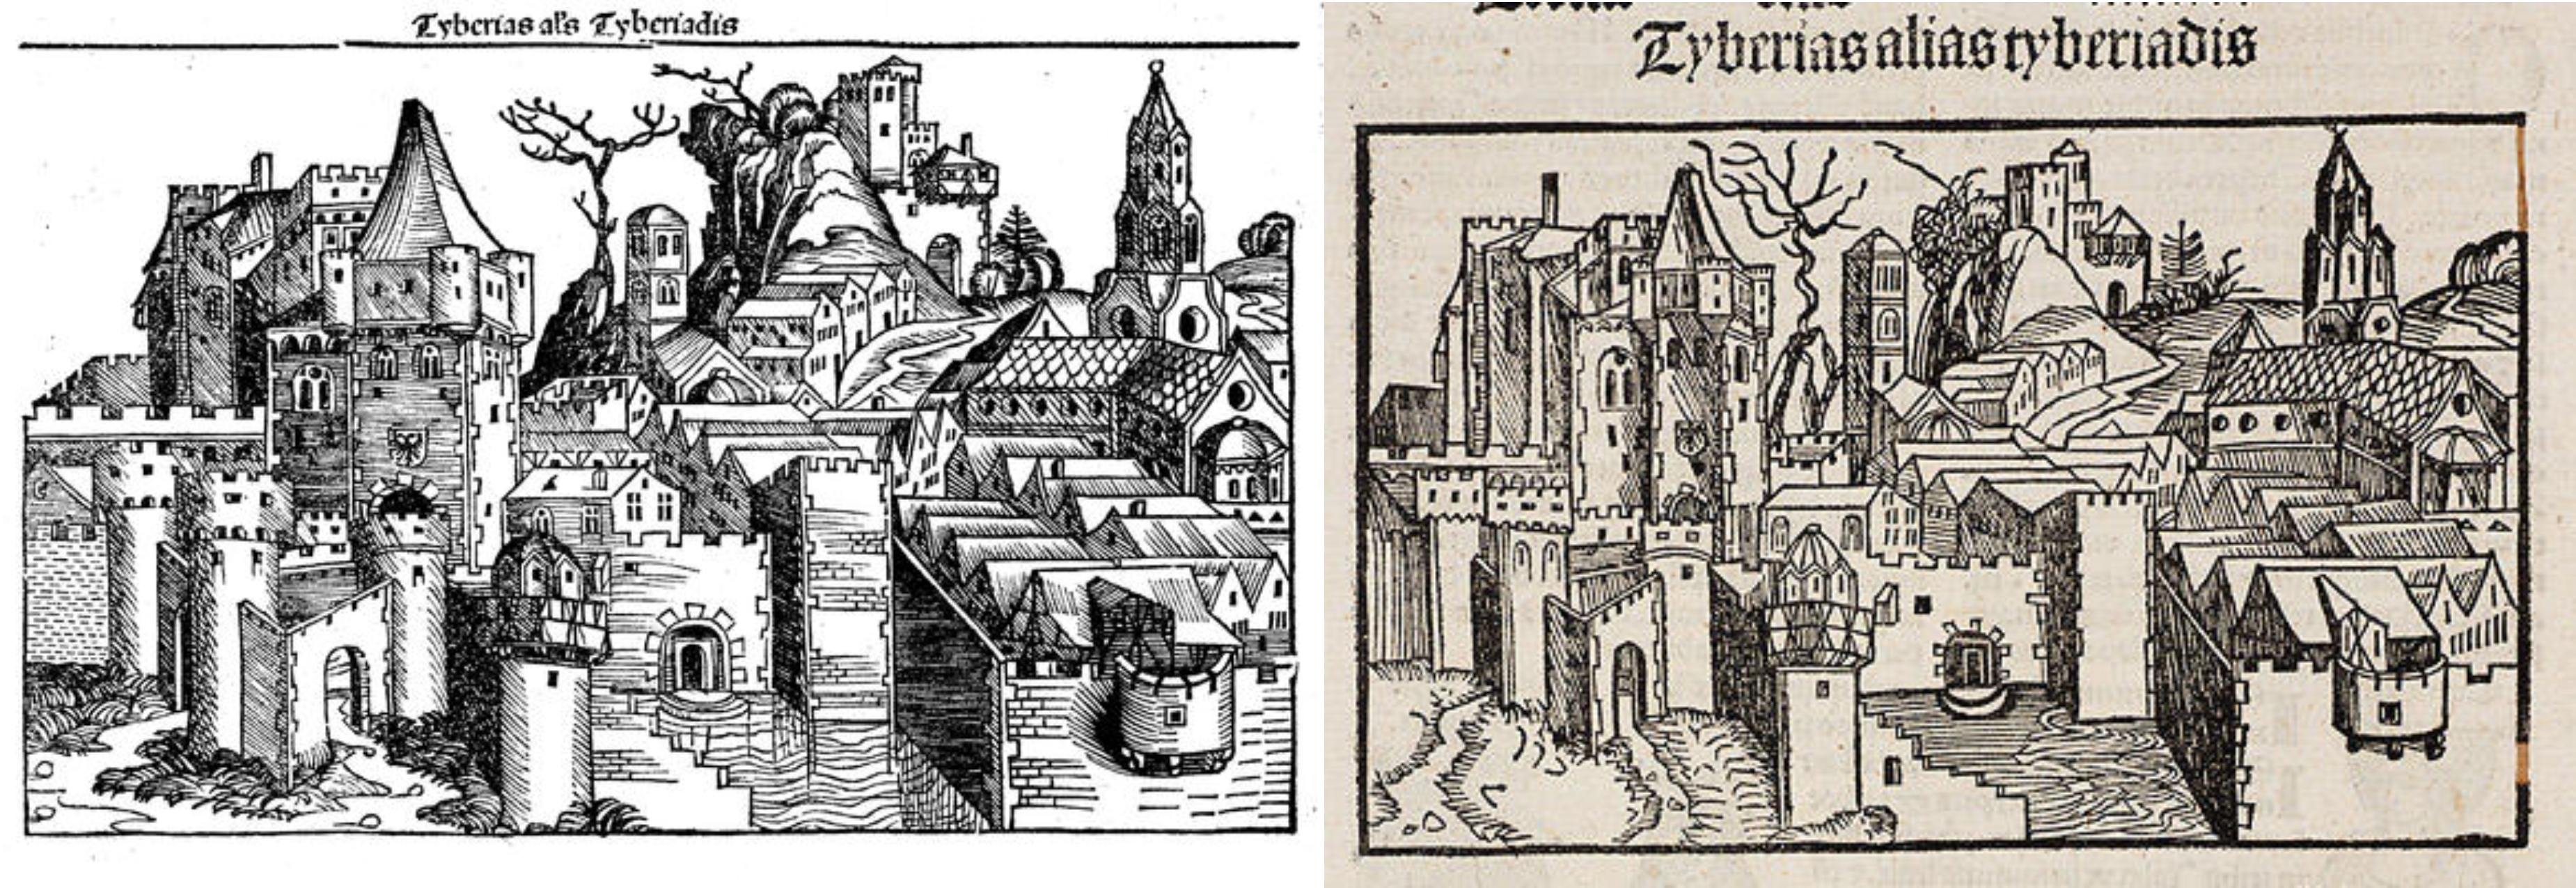 Two side by side images of illustrations of castles with Latin headings.